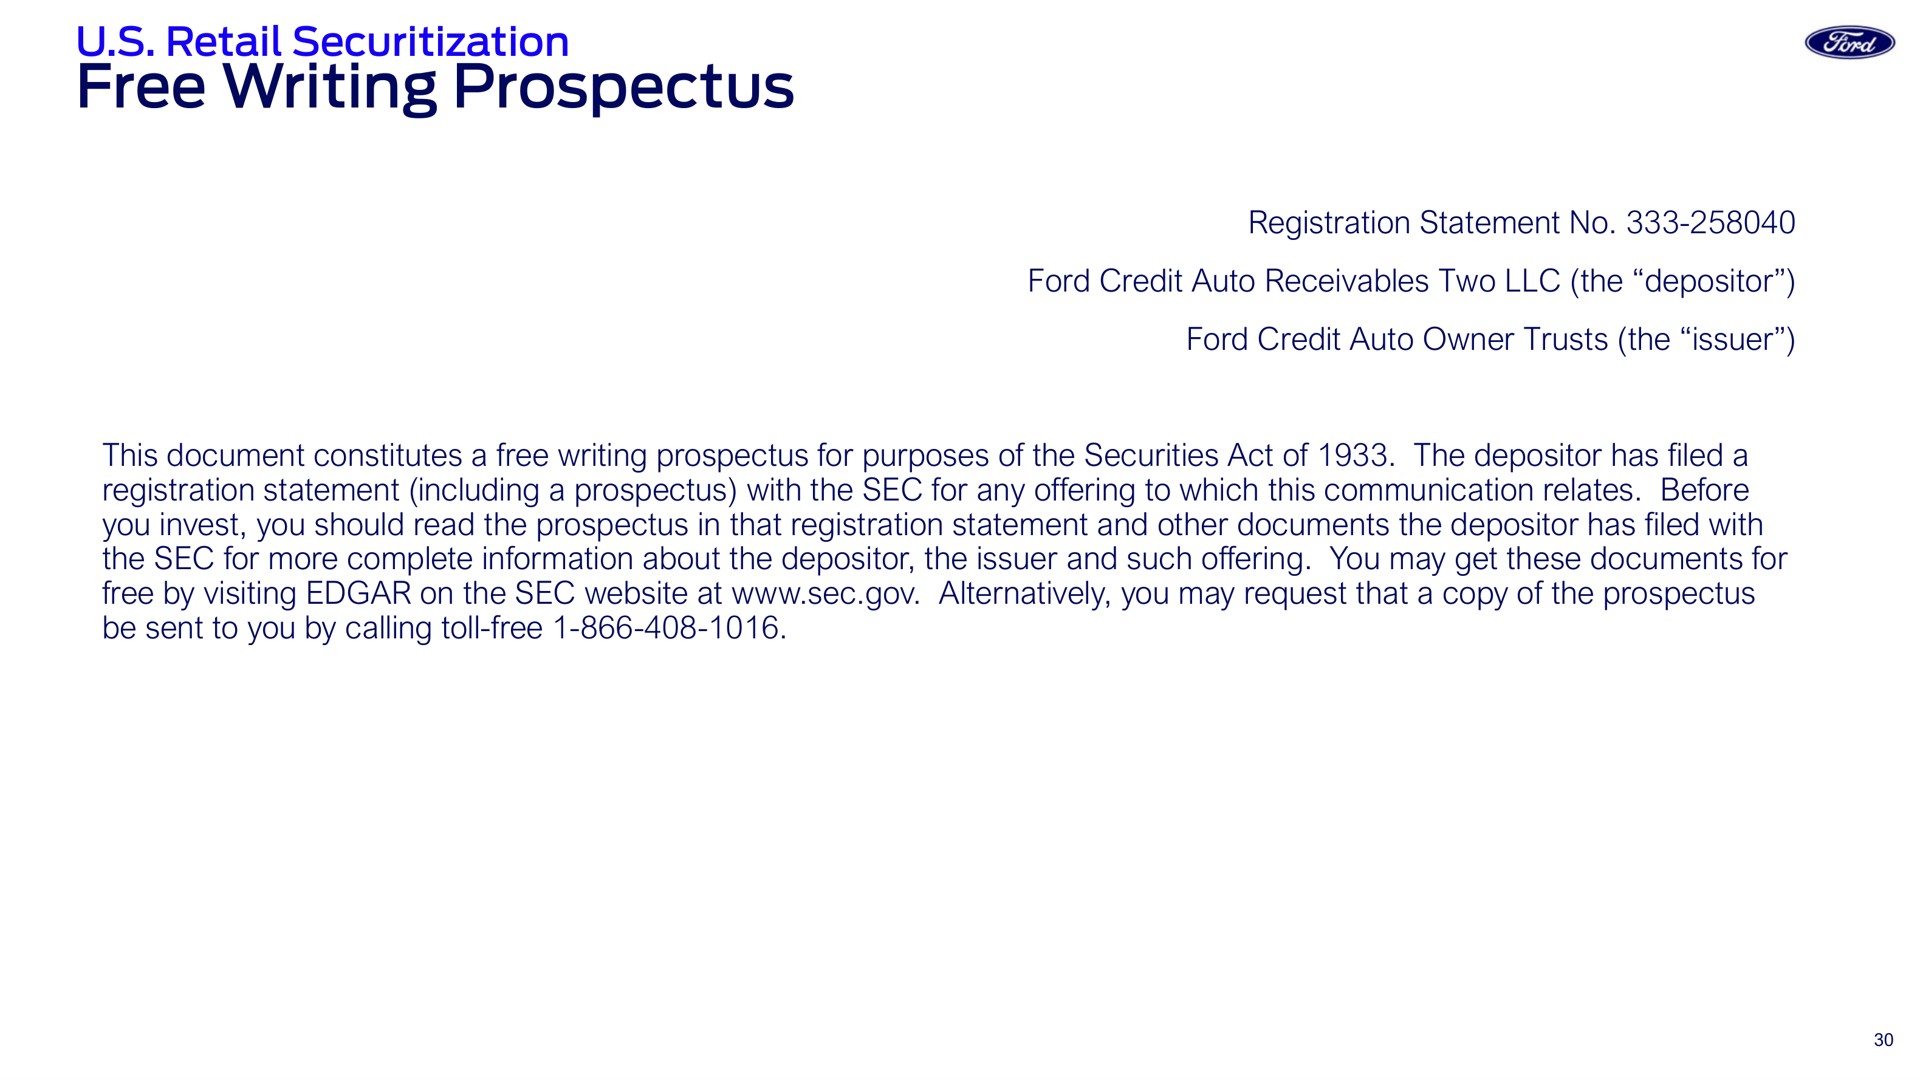 free writing prospectus | Ford Credit